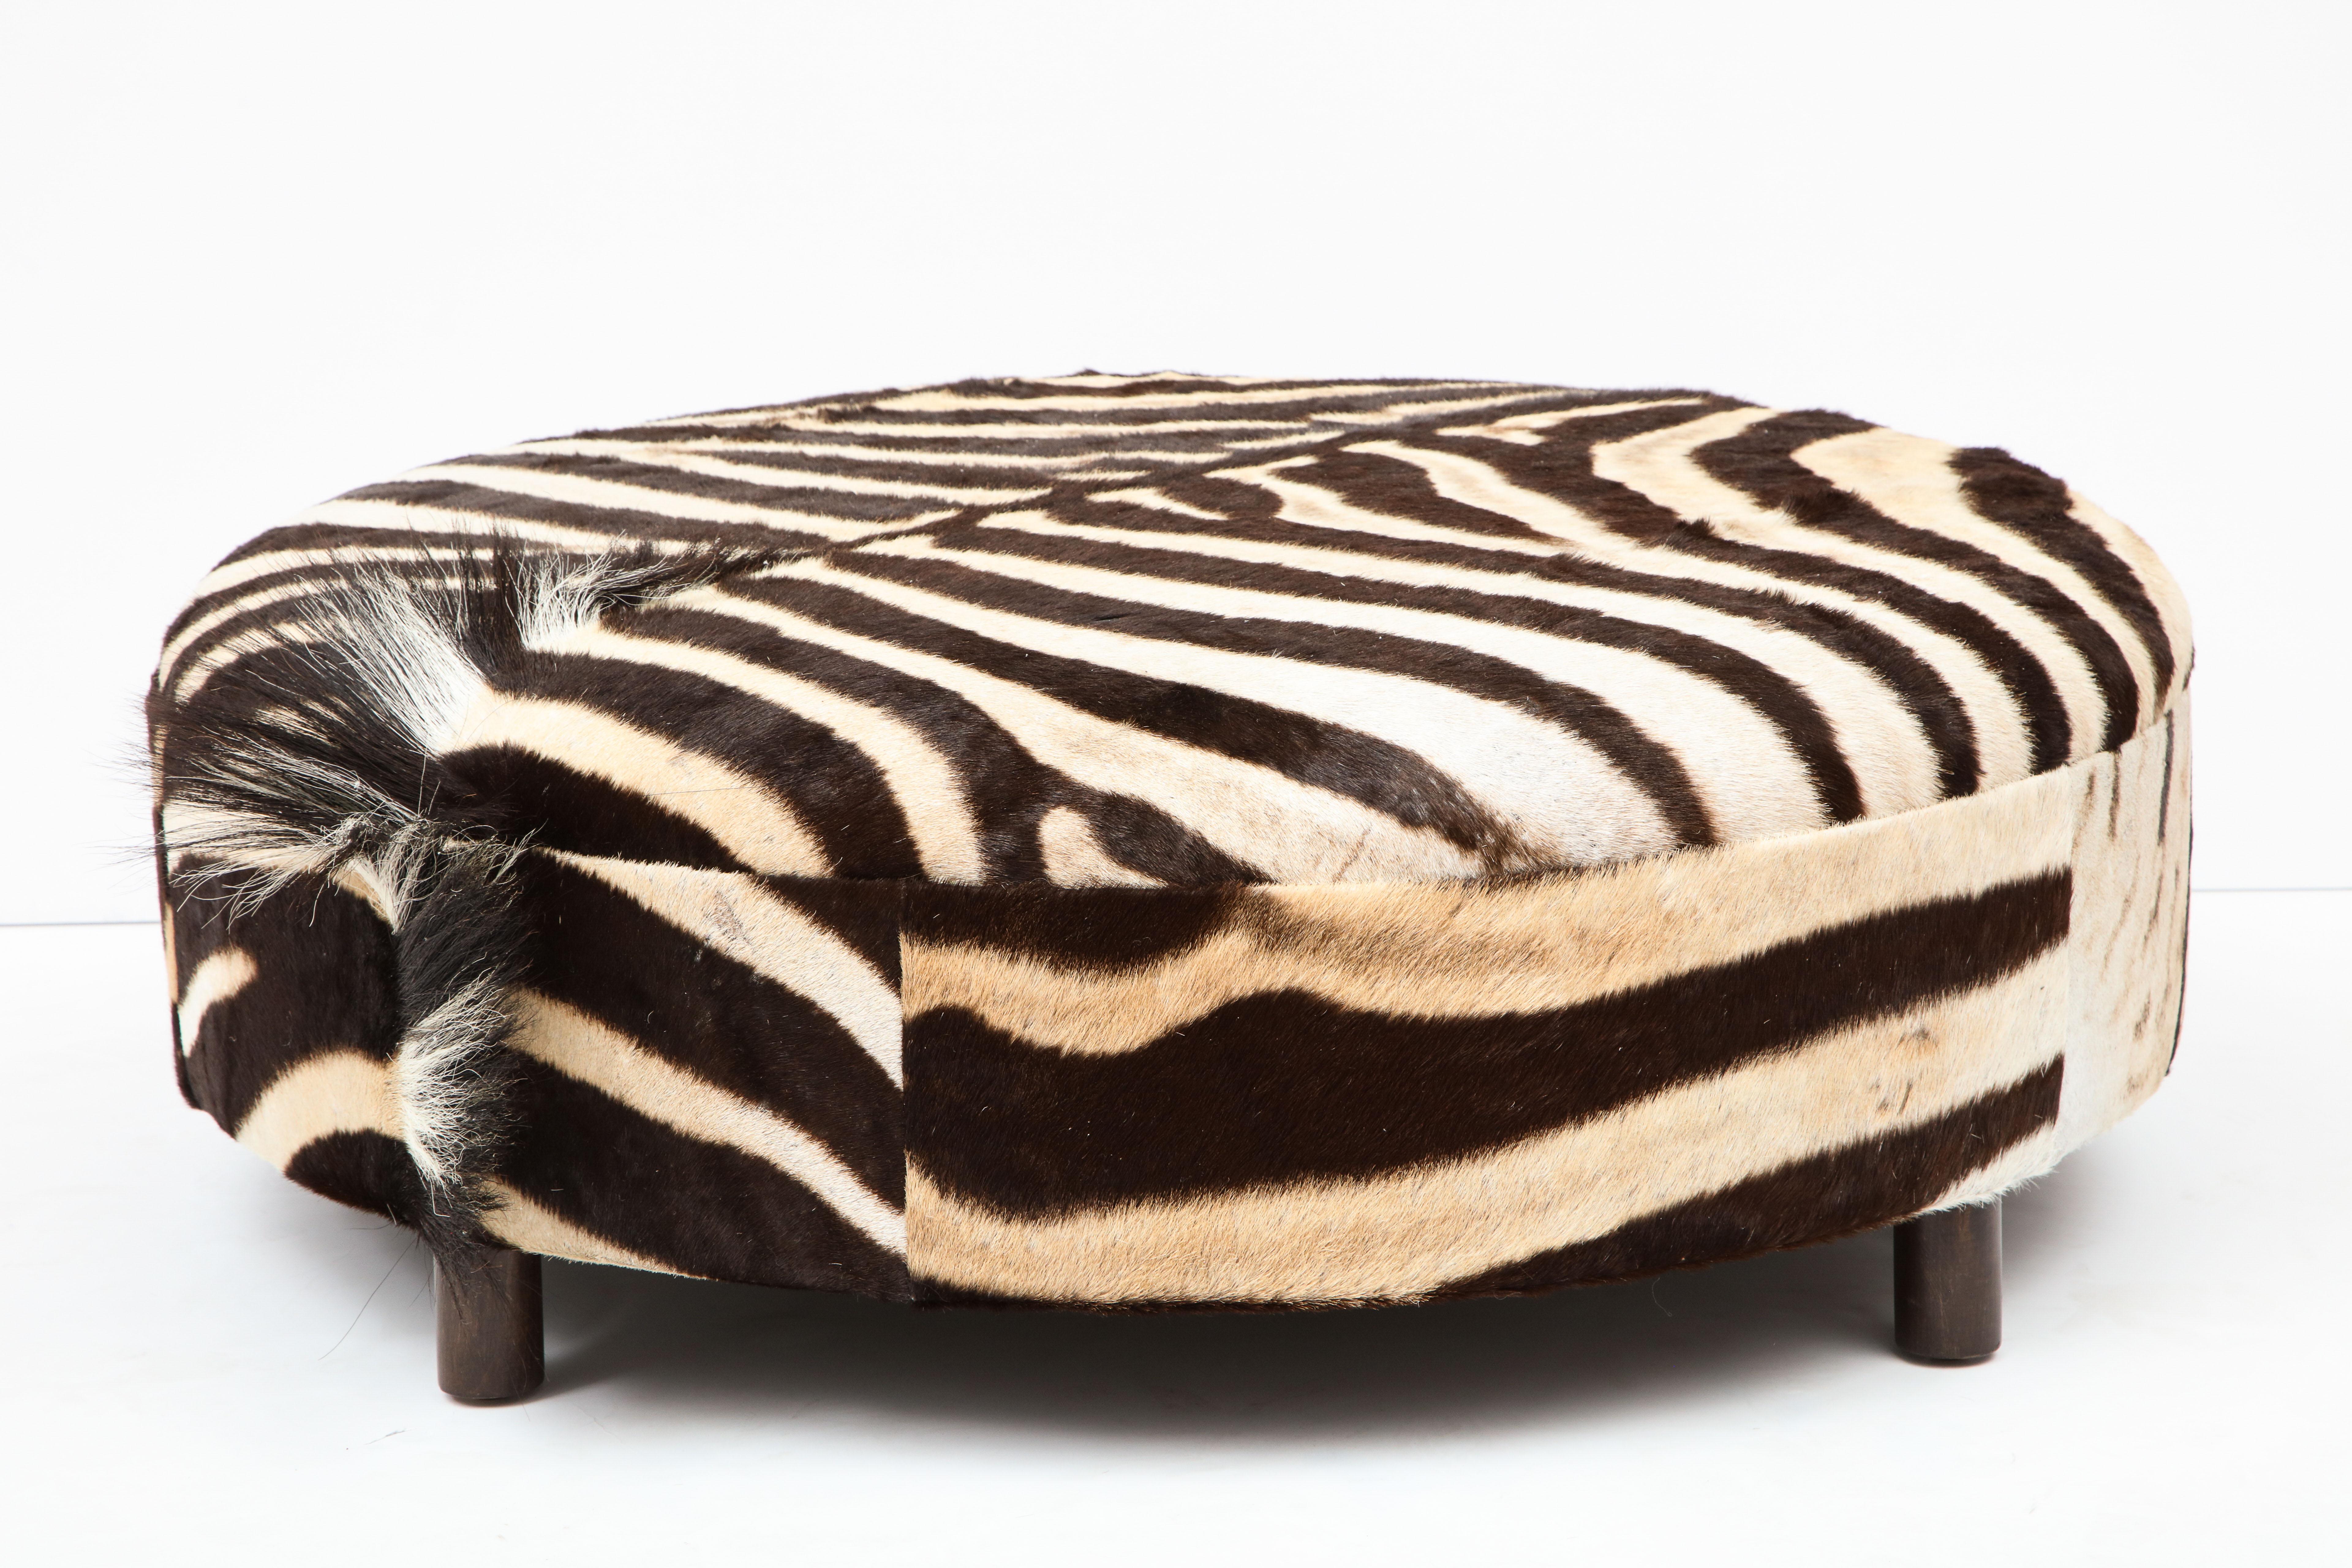 Decorative zebra hide ottoman. Zebra hides are from South Africa and the ottoman is made in NJ. Measures: diameter is 36 inches and height is 12 inches. The mane of the zebra is very decorative located on the side of the ottoman. The ottoman has